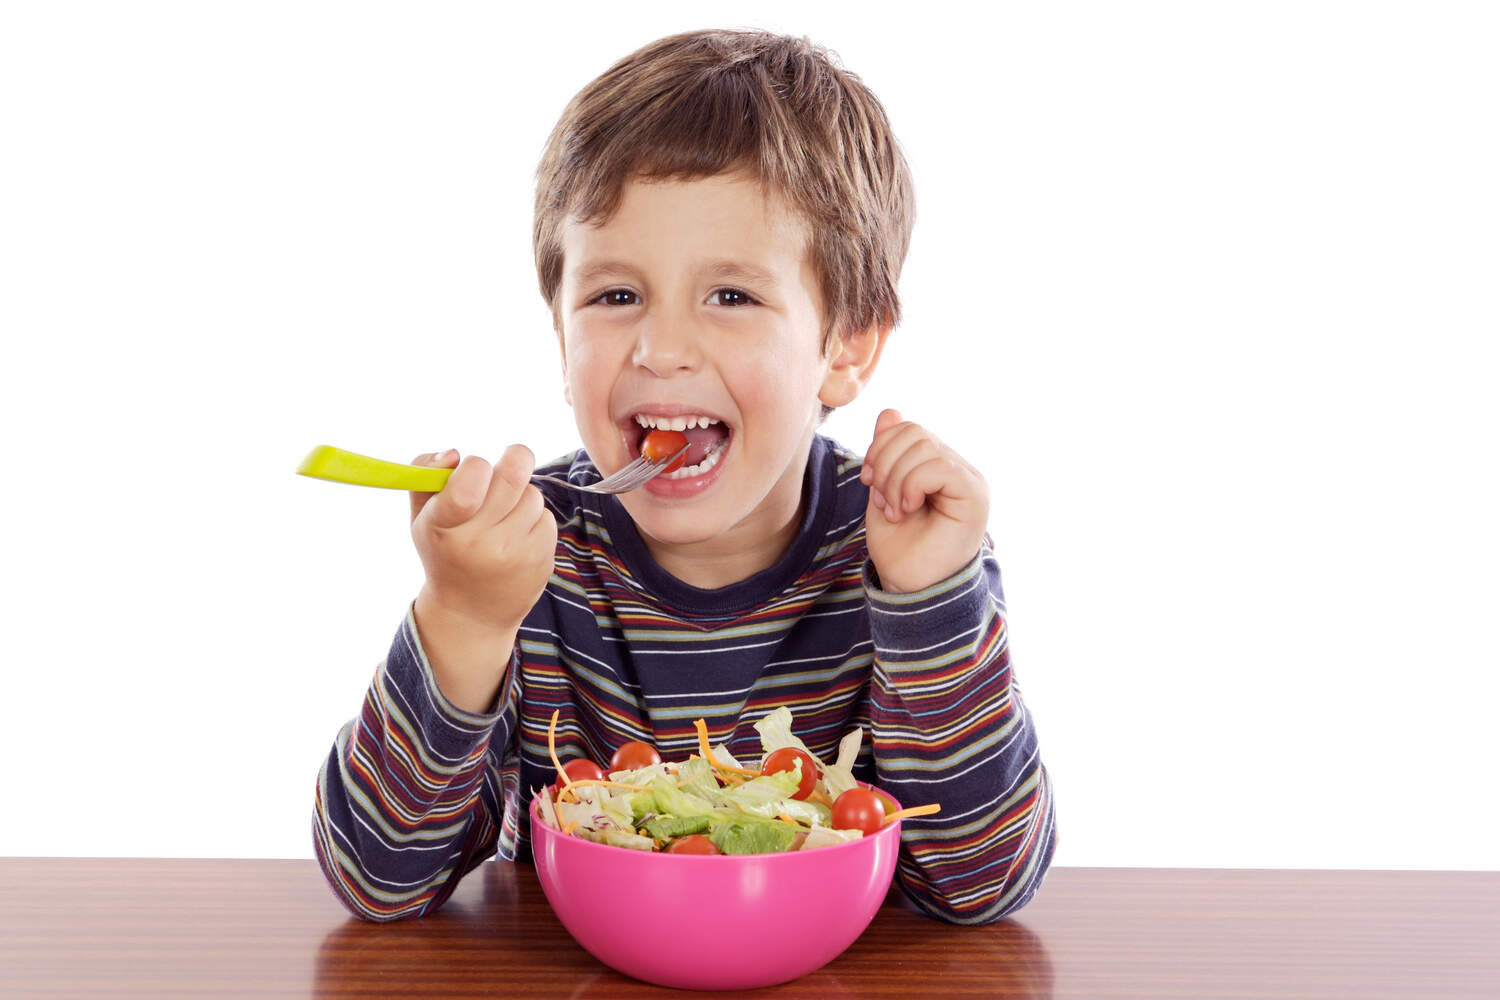 A well balanced vegetarian diet can provide good nutrition to toddler